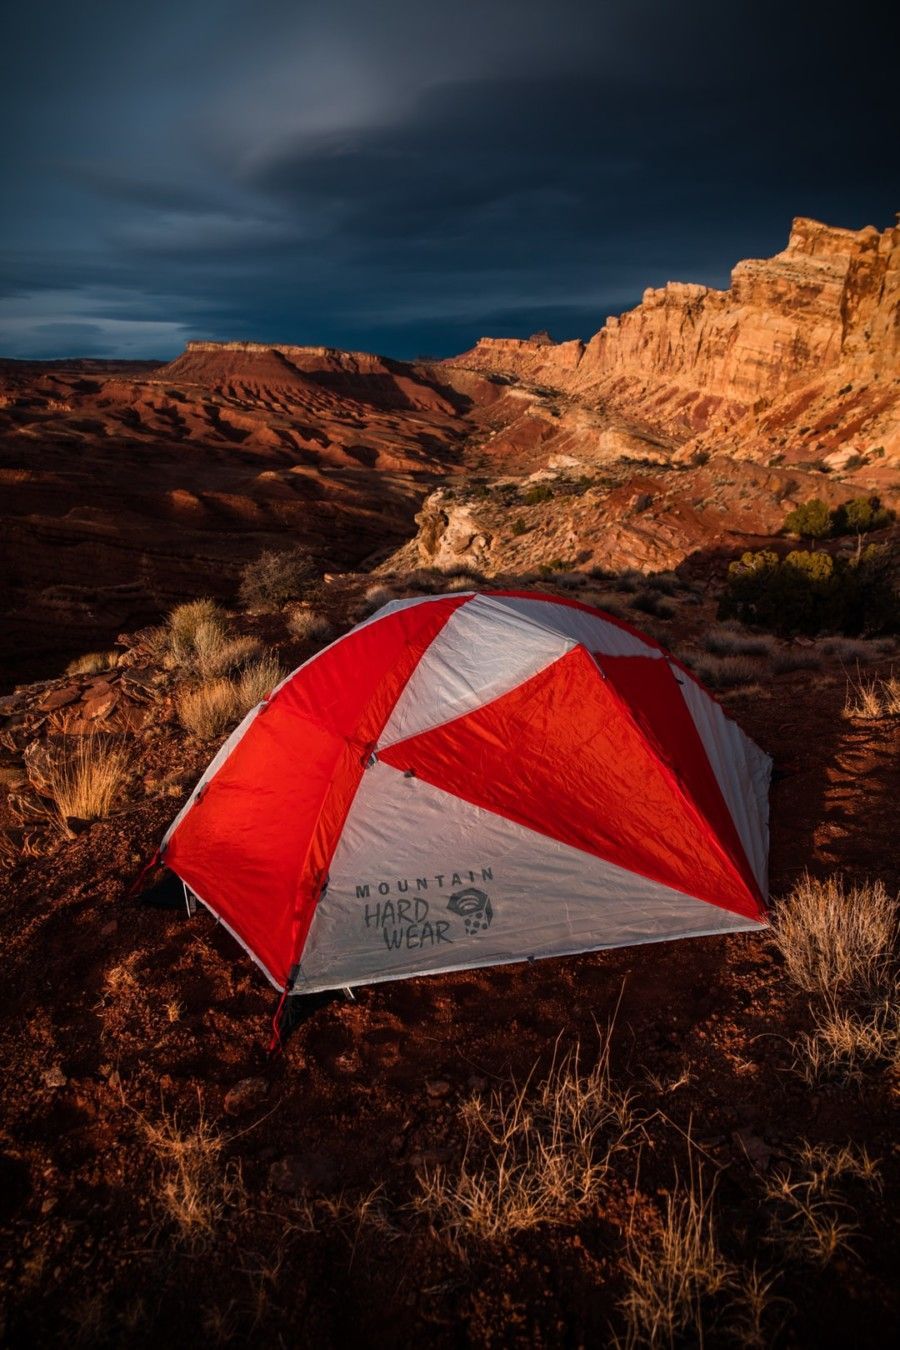 red-and-white-mountain-hard-wear-tent-on-ground-beside-rock-formation